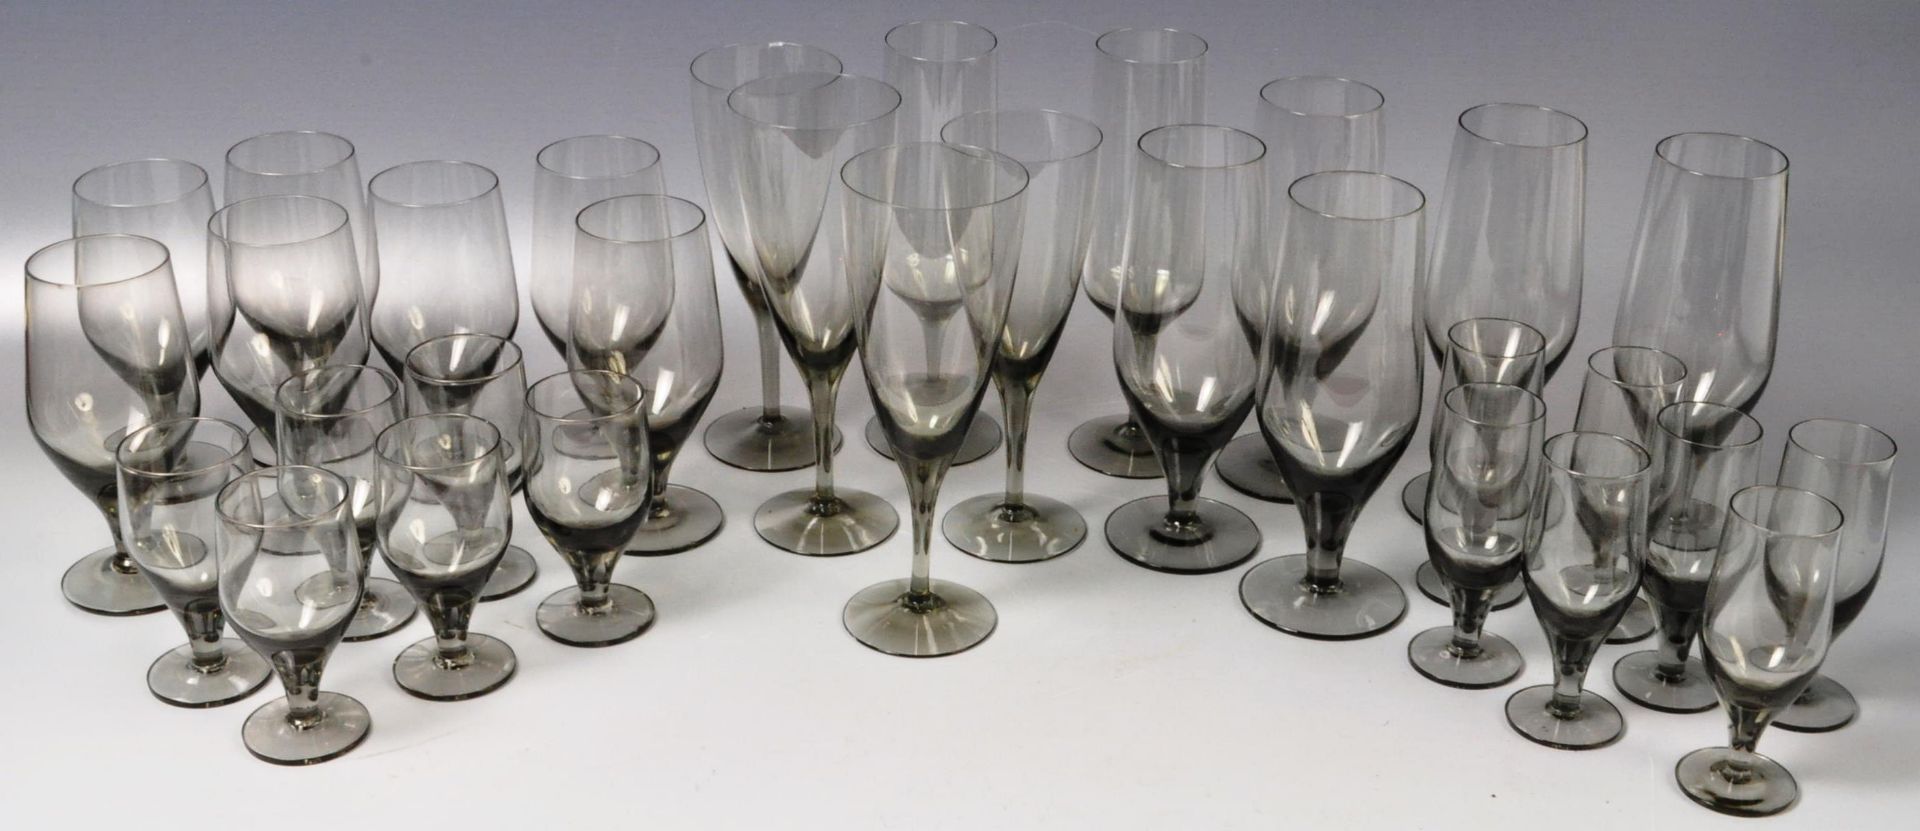 OFFEFORS - COLLECTION OF SMOKEY GLASS DRINKING GLASSES - Bild 2 aus 7